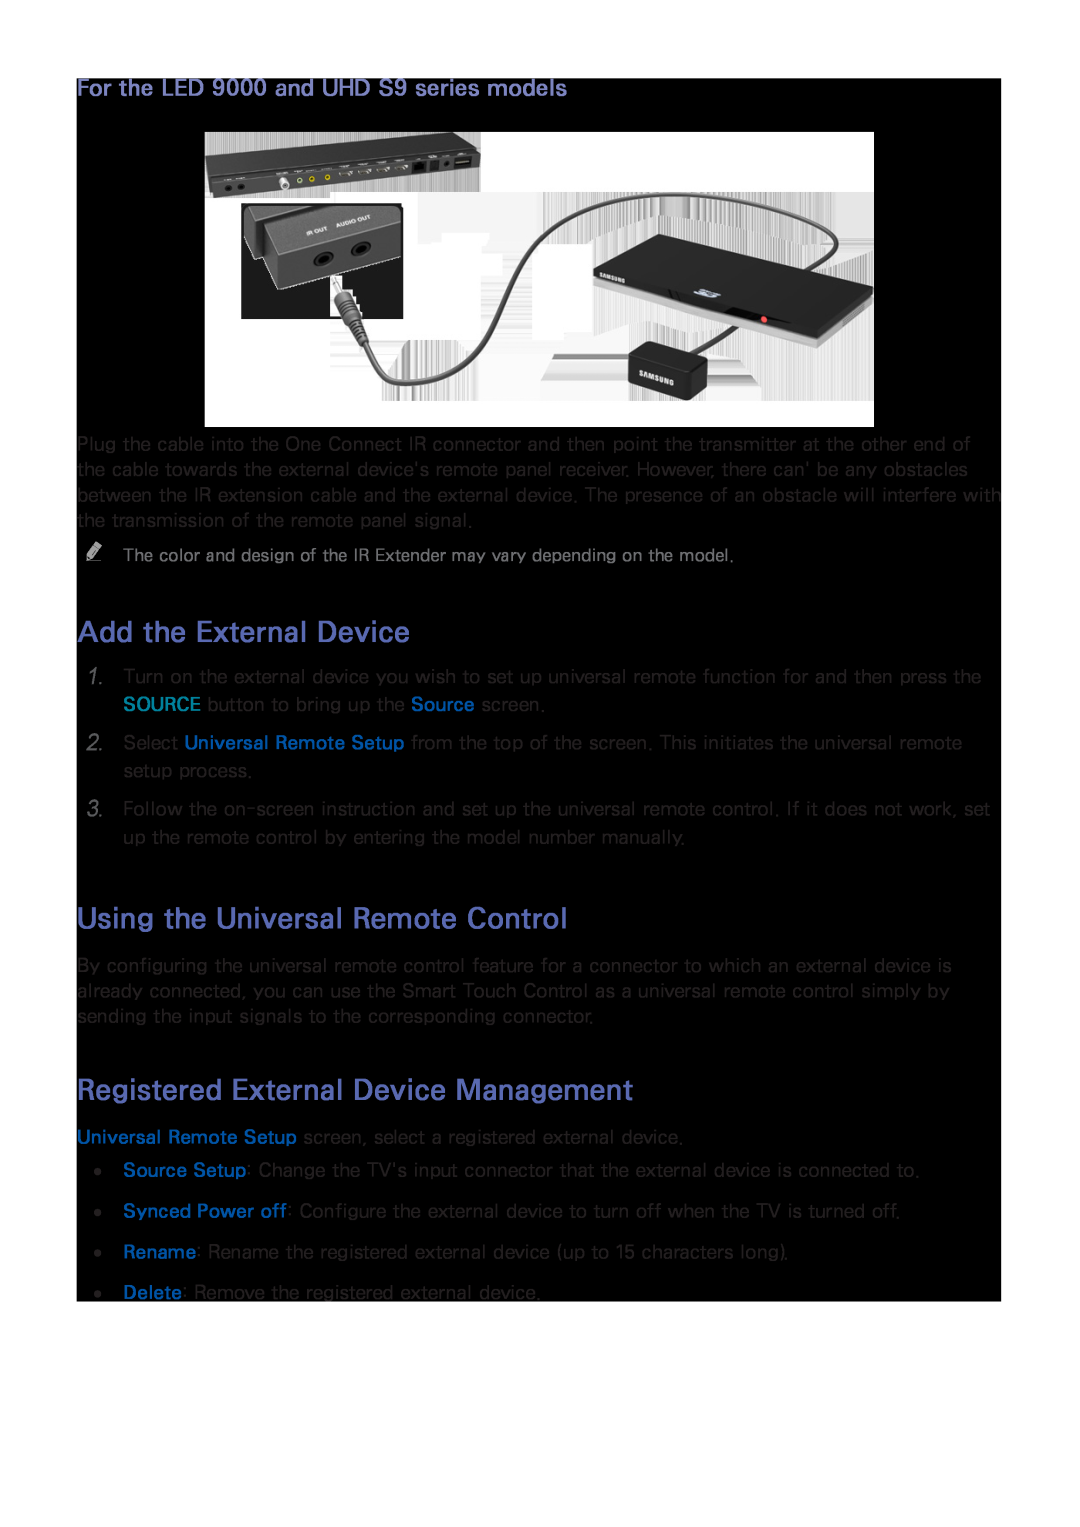 Samsung UN60F8000XZA Add the External Device, Using the Universal Remote Control, Registered External Device Management 